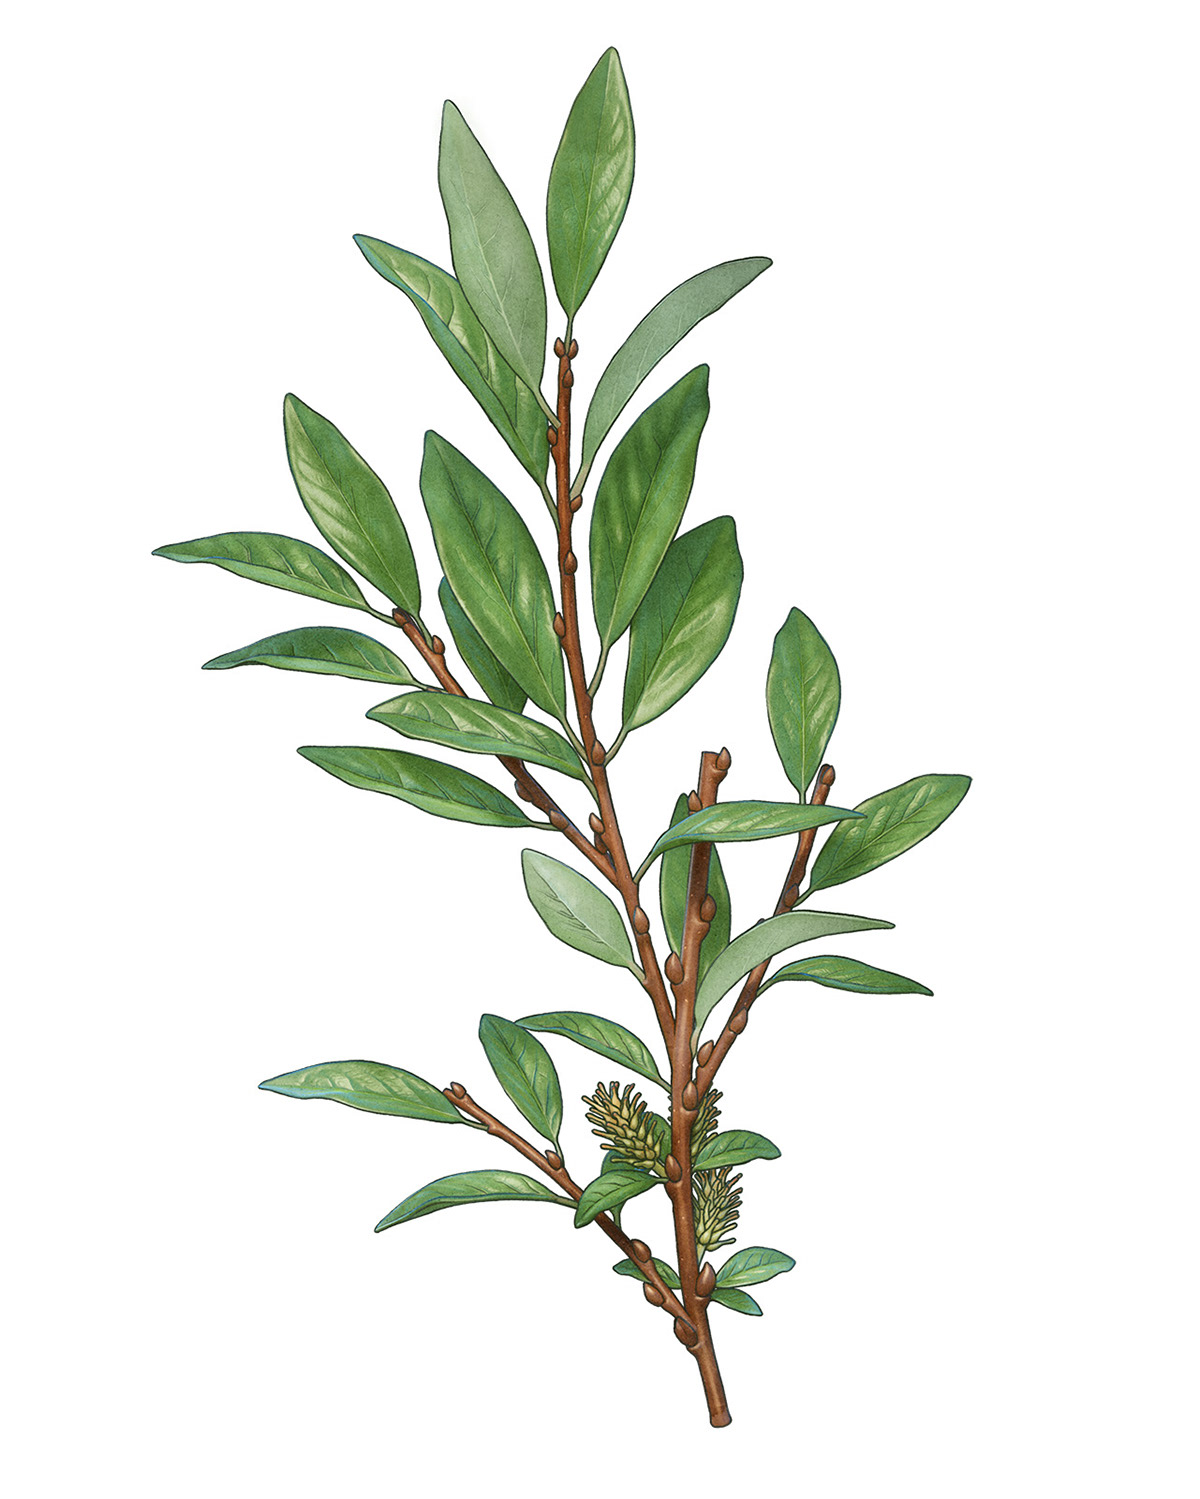 a twig of lingonberry with floral milkweed dwarf birch willow bluberry rowan-berry